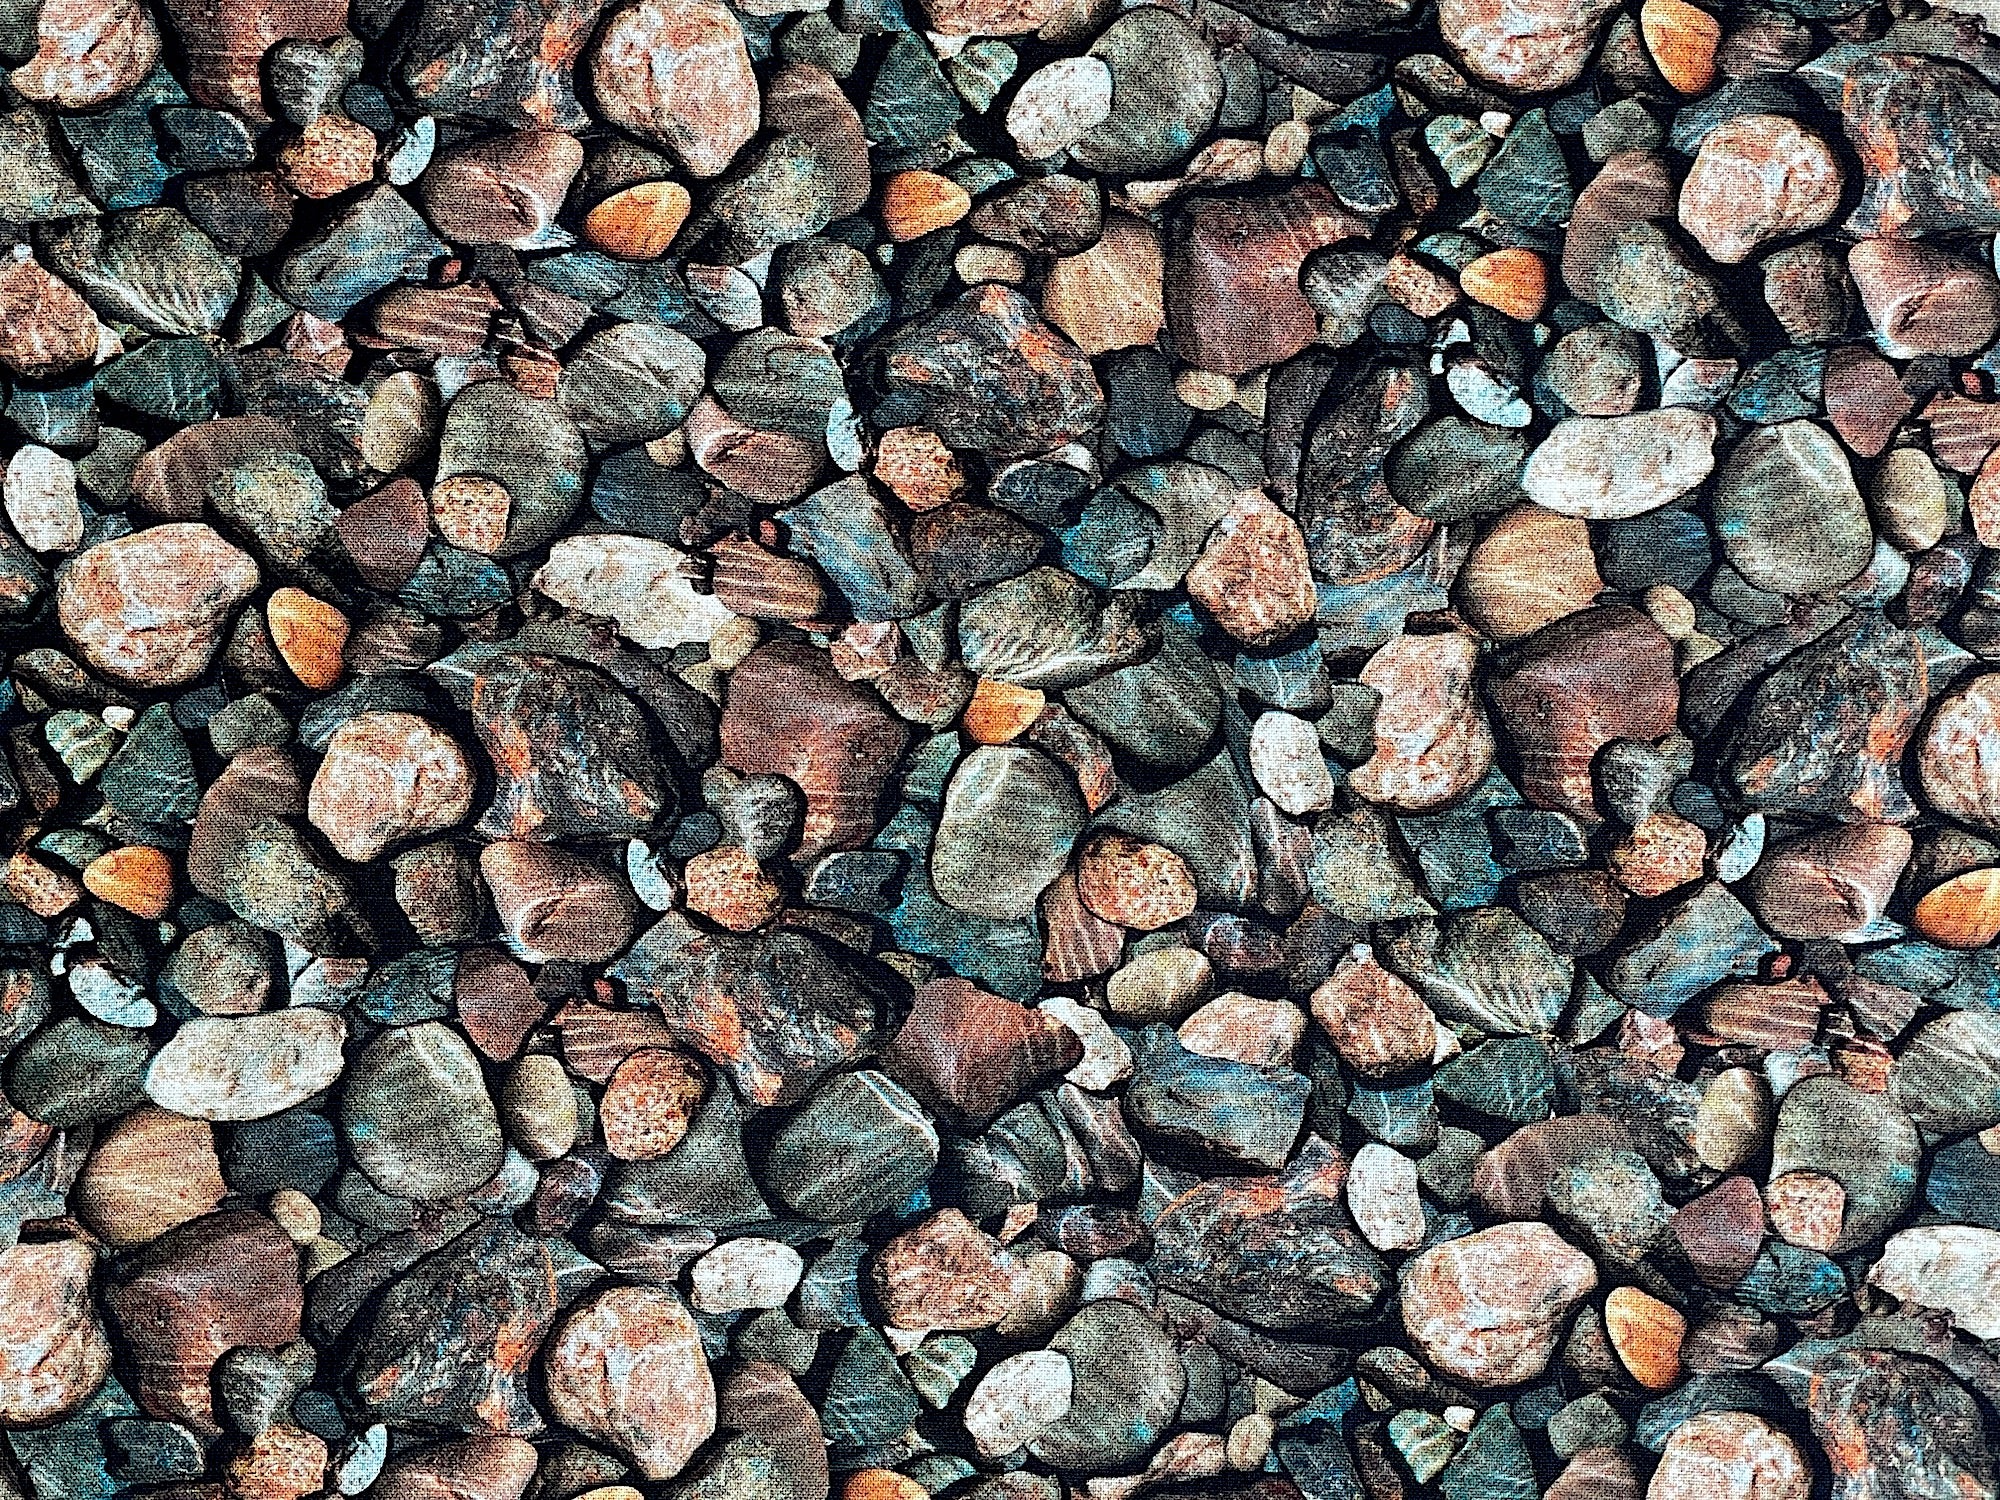 Cotton fabric covered with rocks.